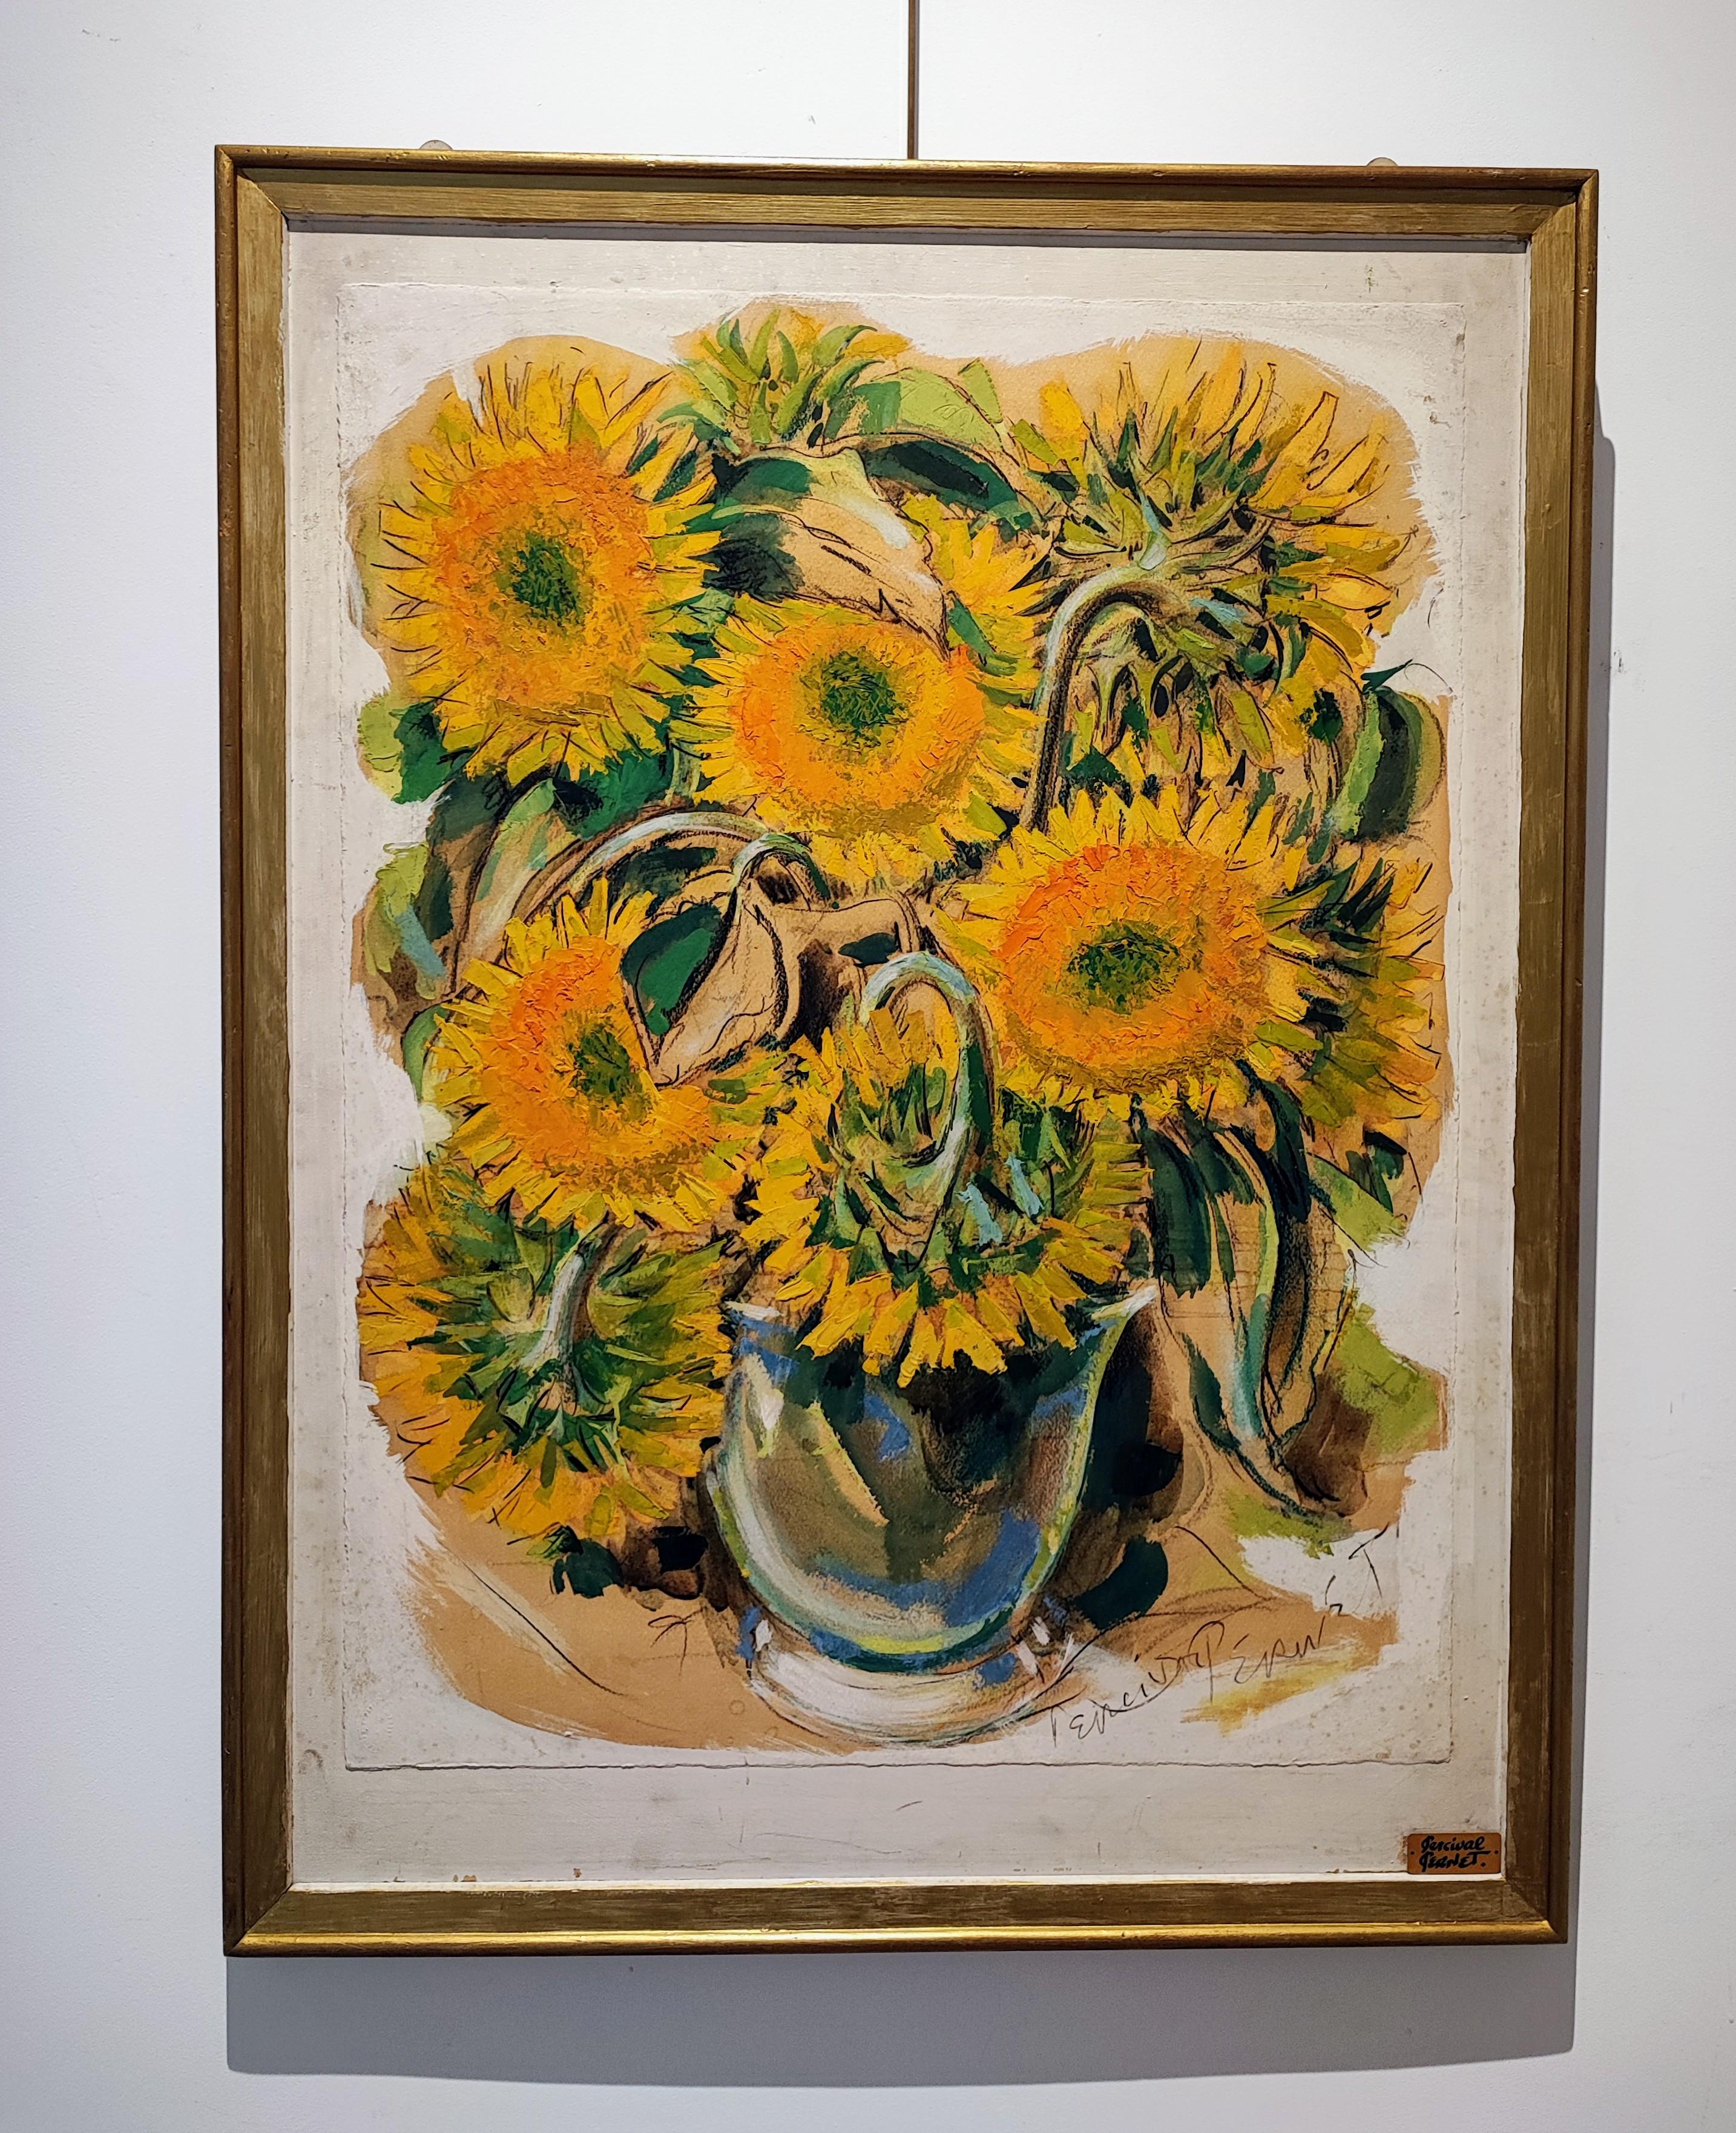 Bouquet of sunflowers - Painting by Percival Pernet